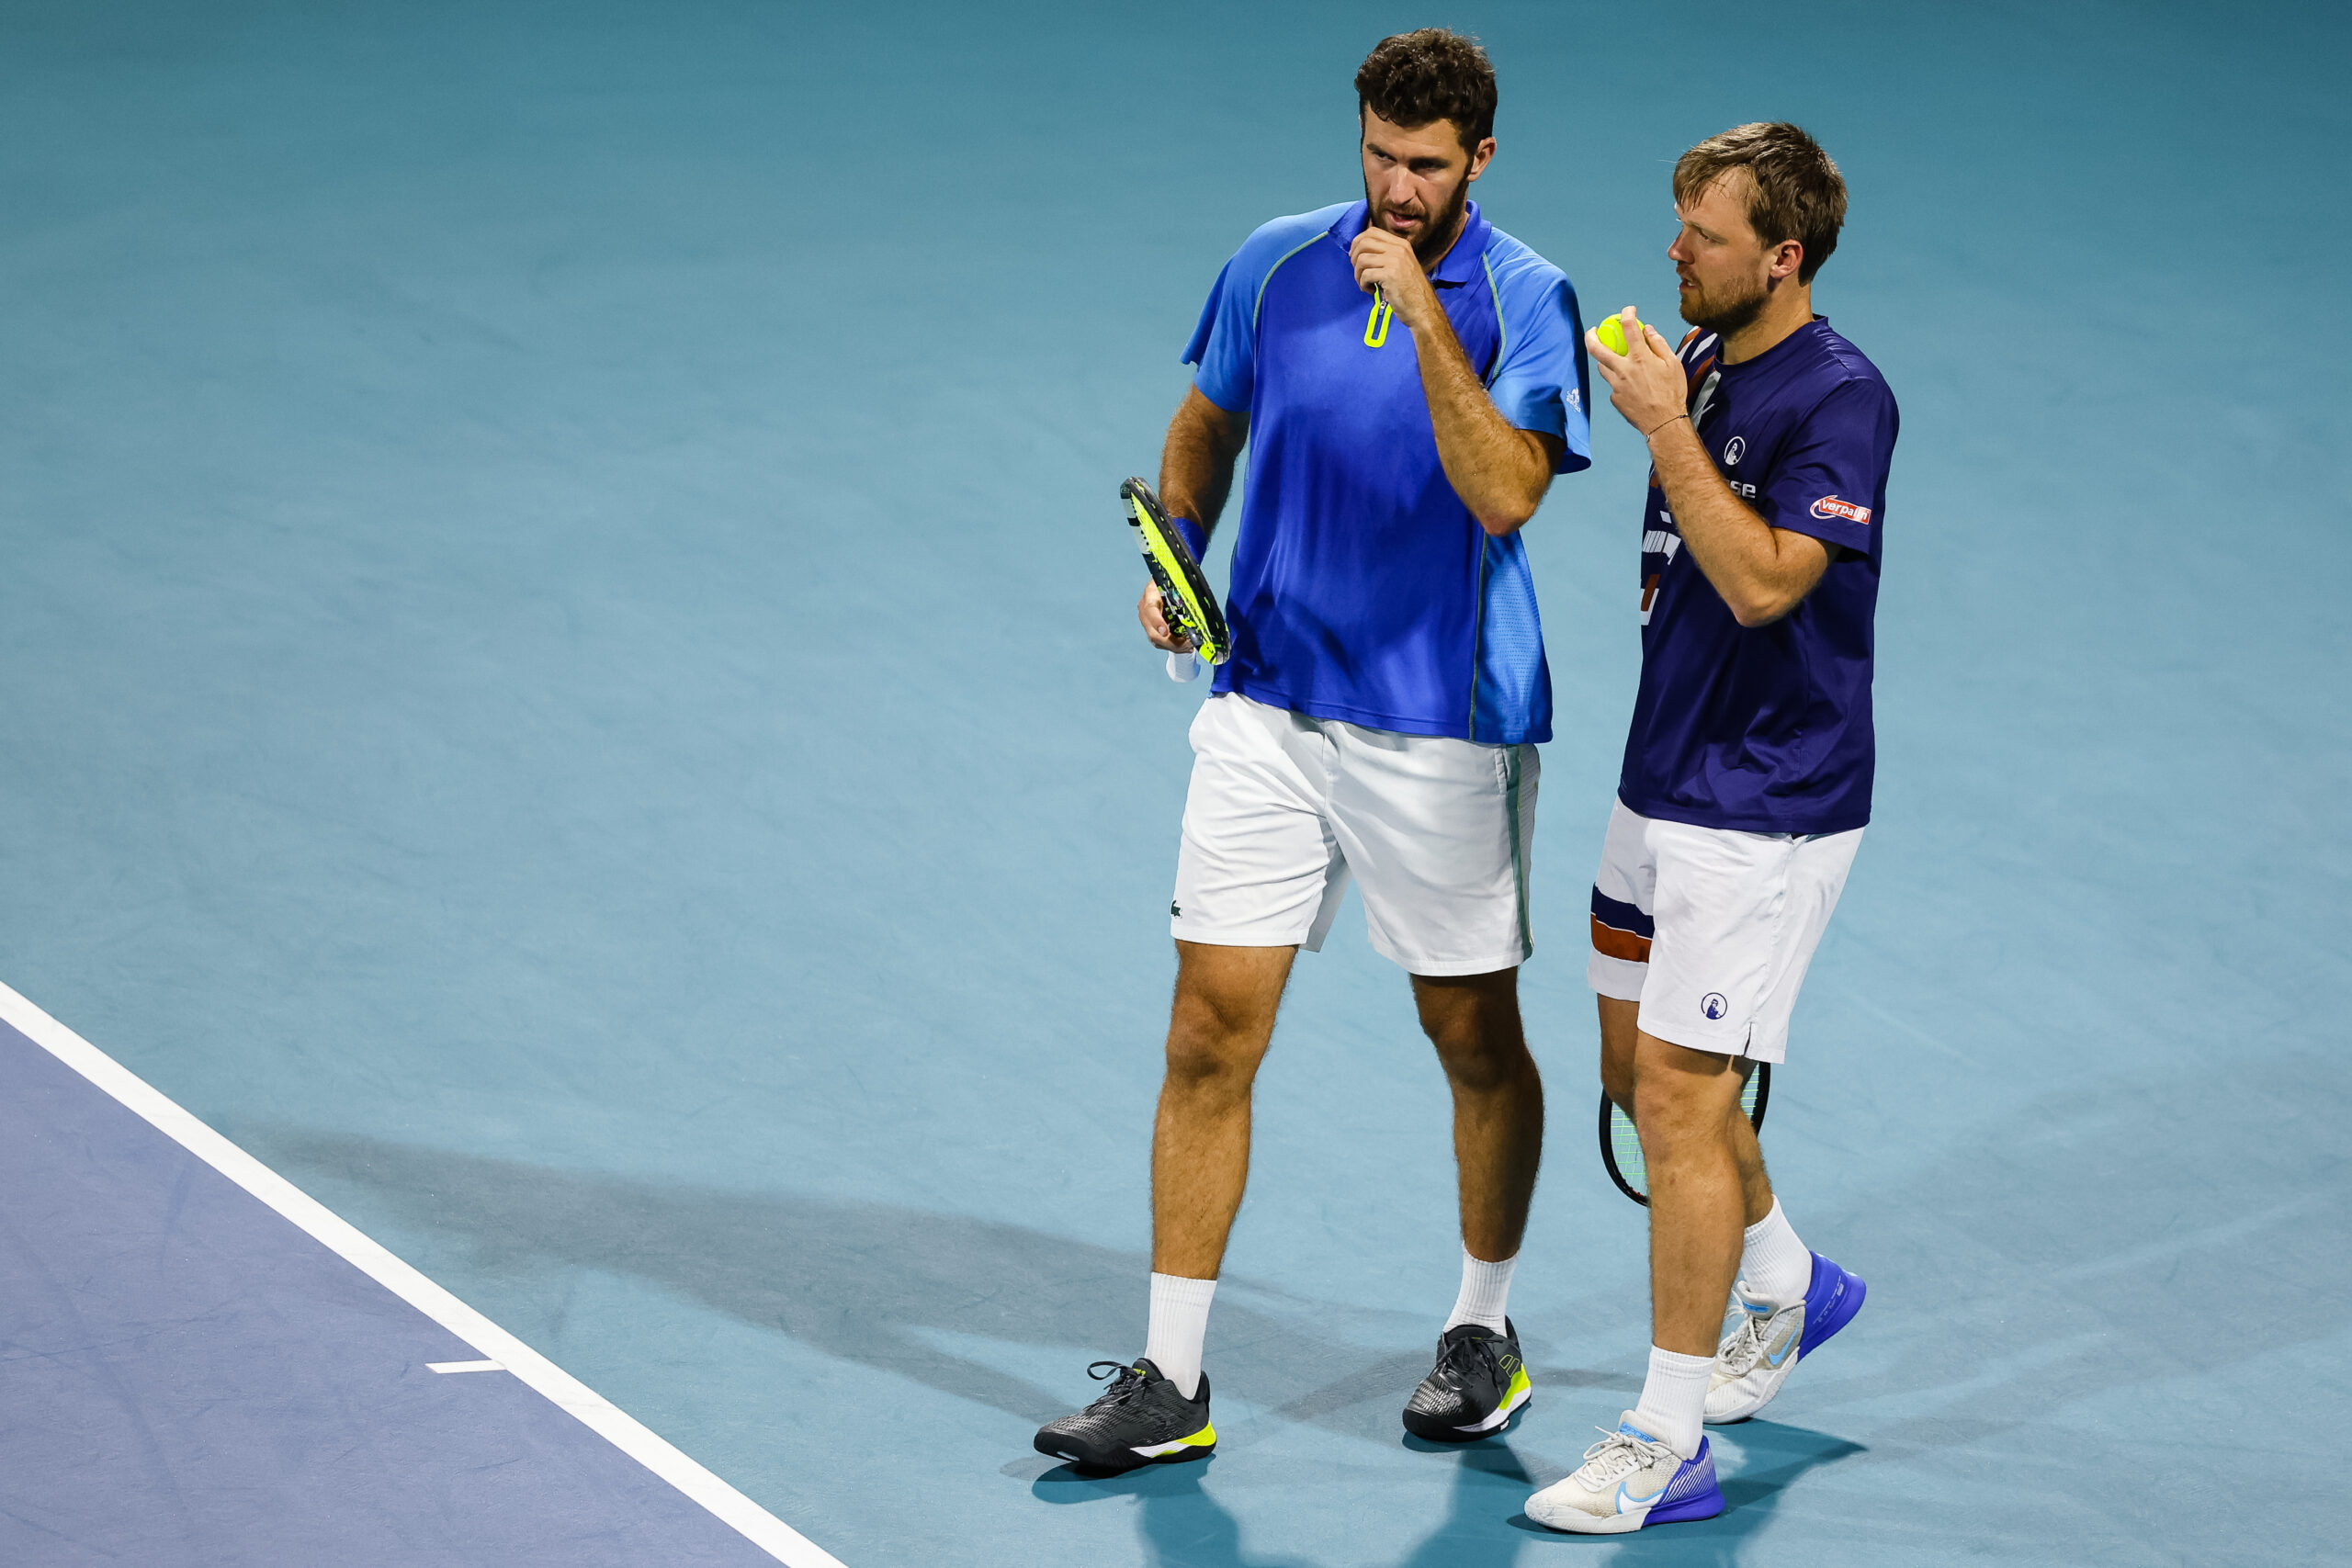 Fabrice Martin (left) and partner Kevin Krawietz discuss strategy during their semifinals doubles match at the 2023 Miami Open in Miami Gardens, Florida.